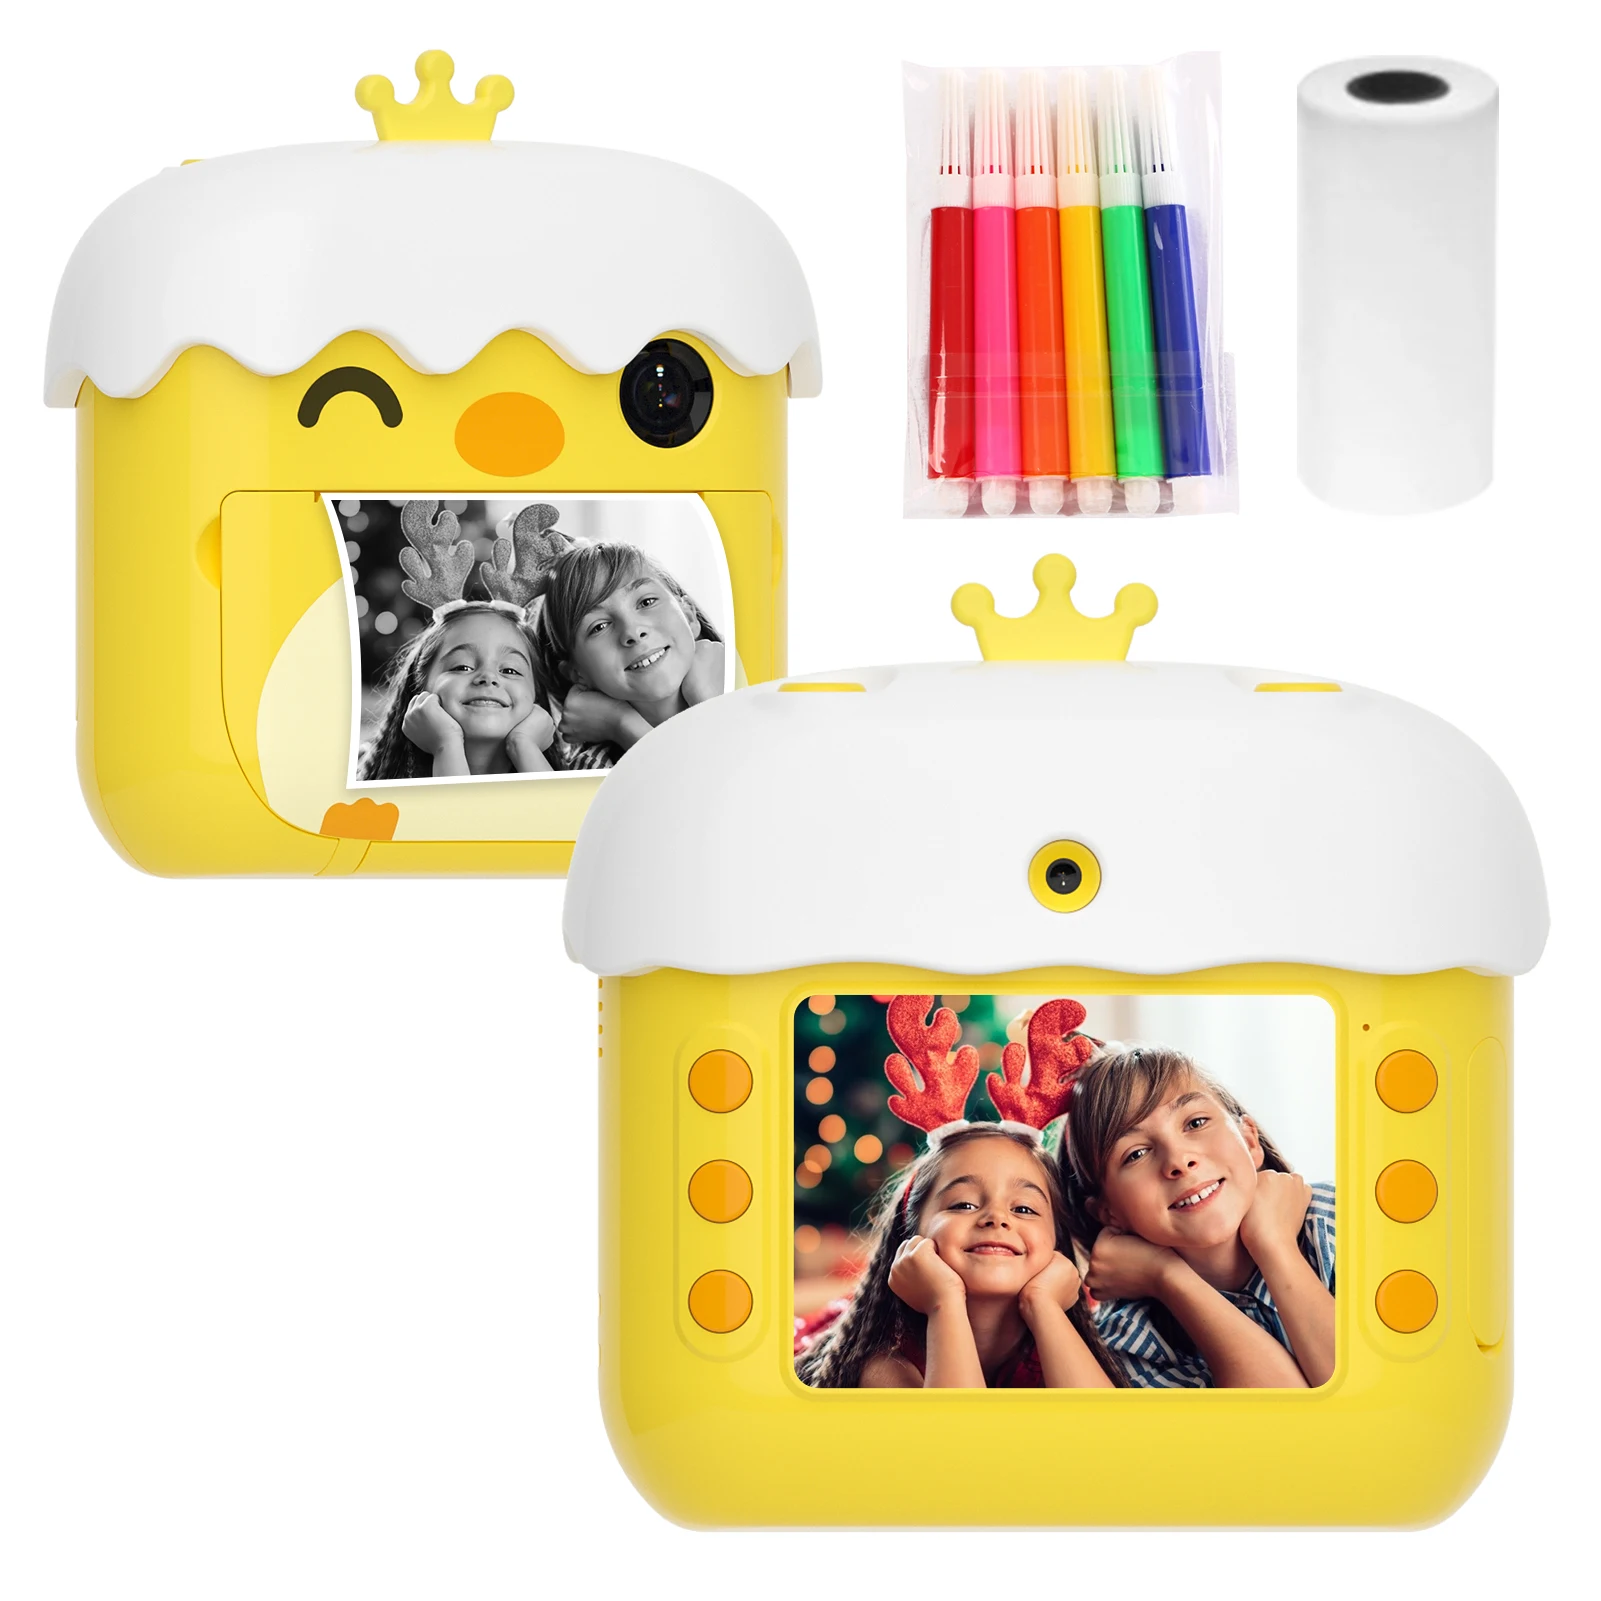 1080P Digital Instant Camera Cute Kids Photo Printer with 12MP Front and Rear Cameras Print Paper for Boys Girls Christmas Gift mirrorless digital camera